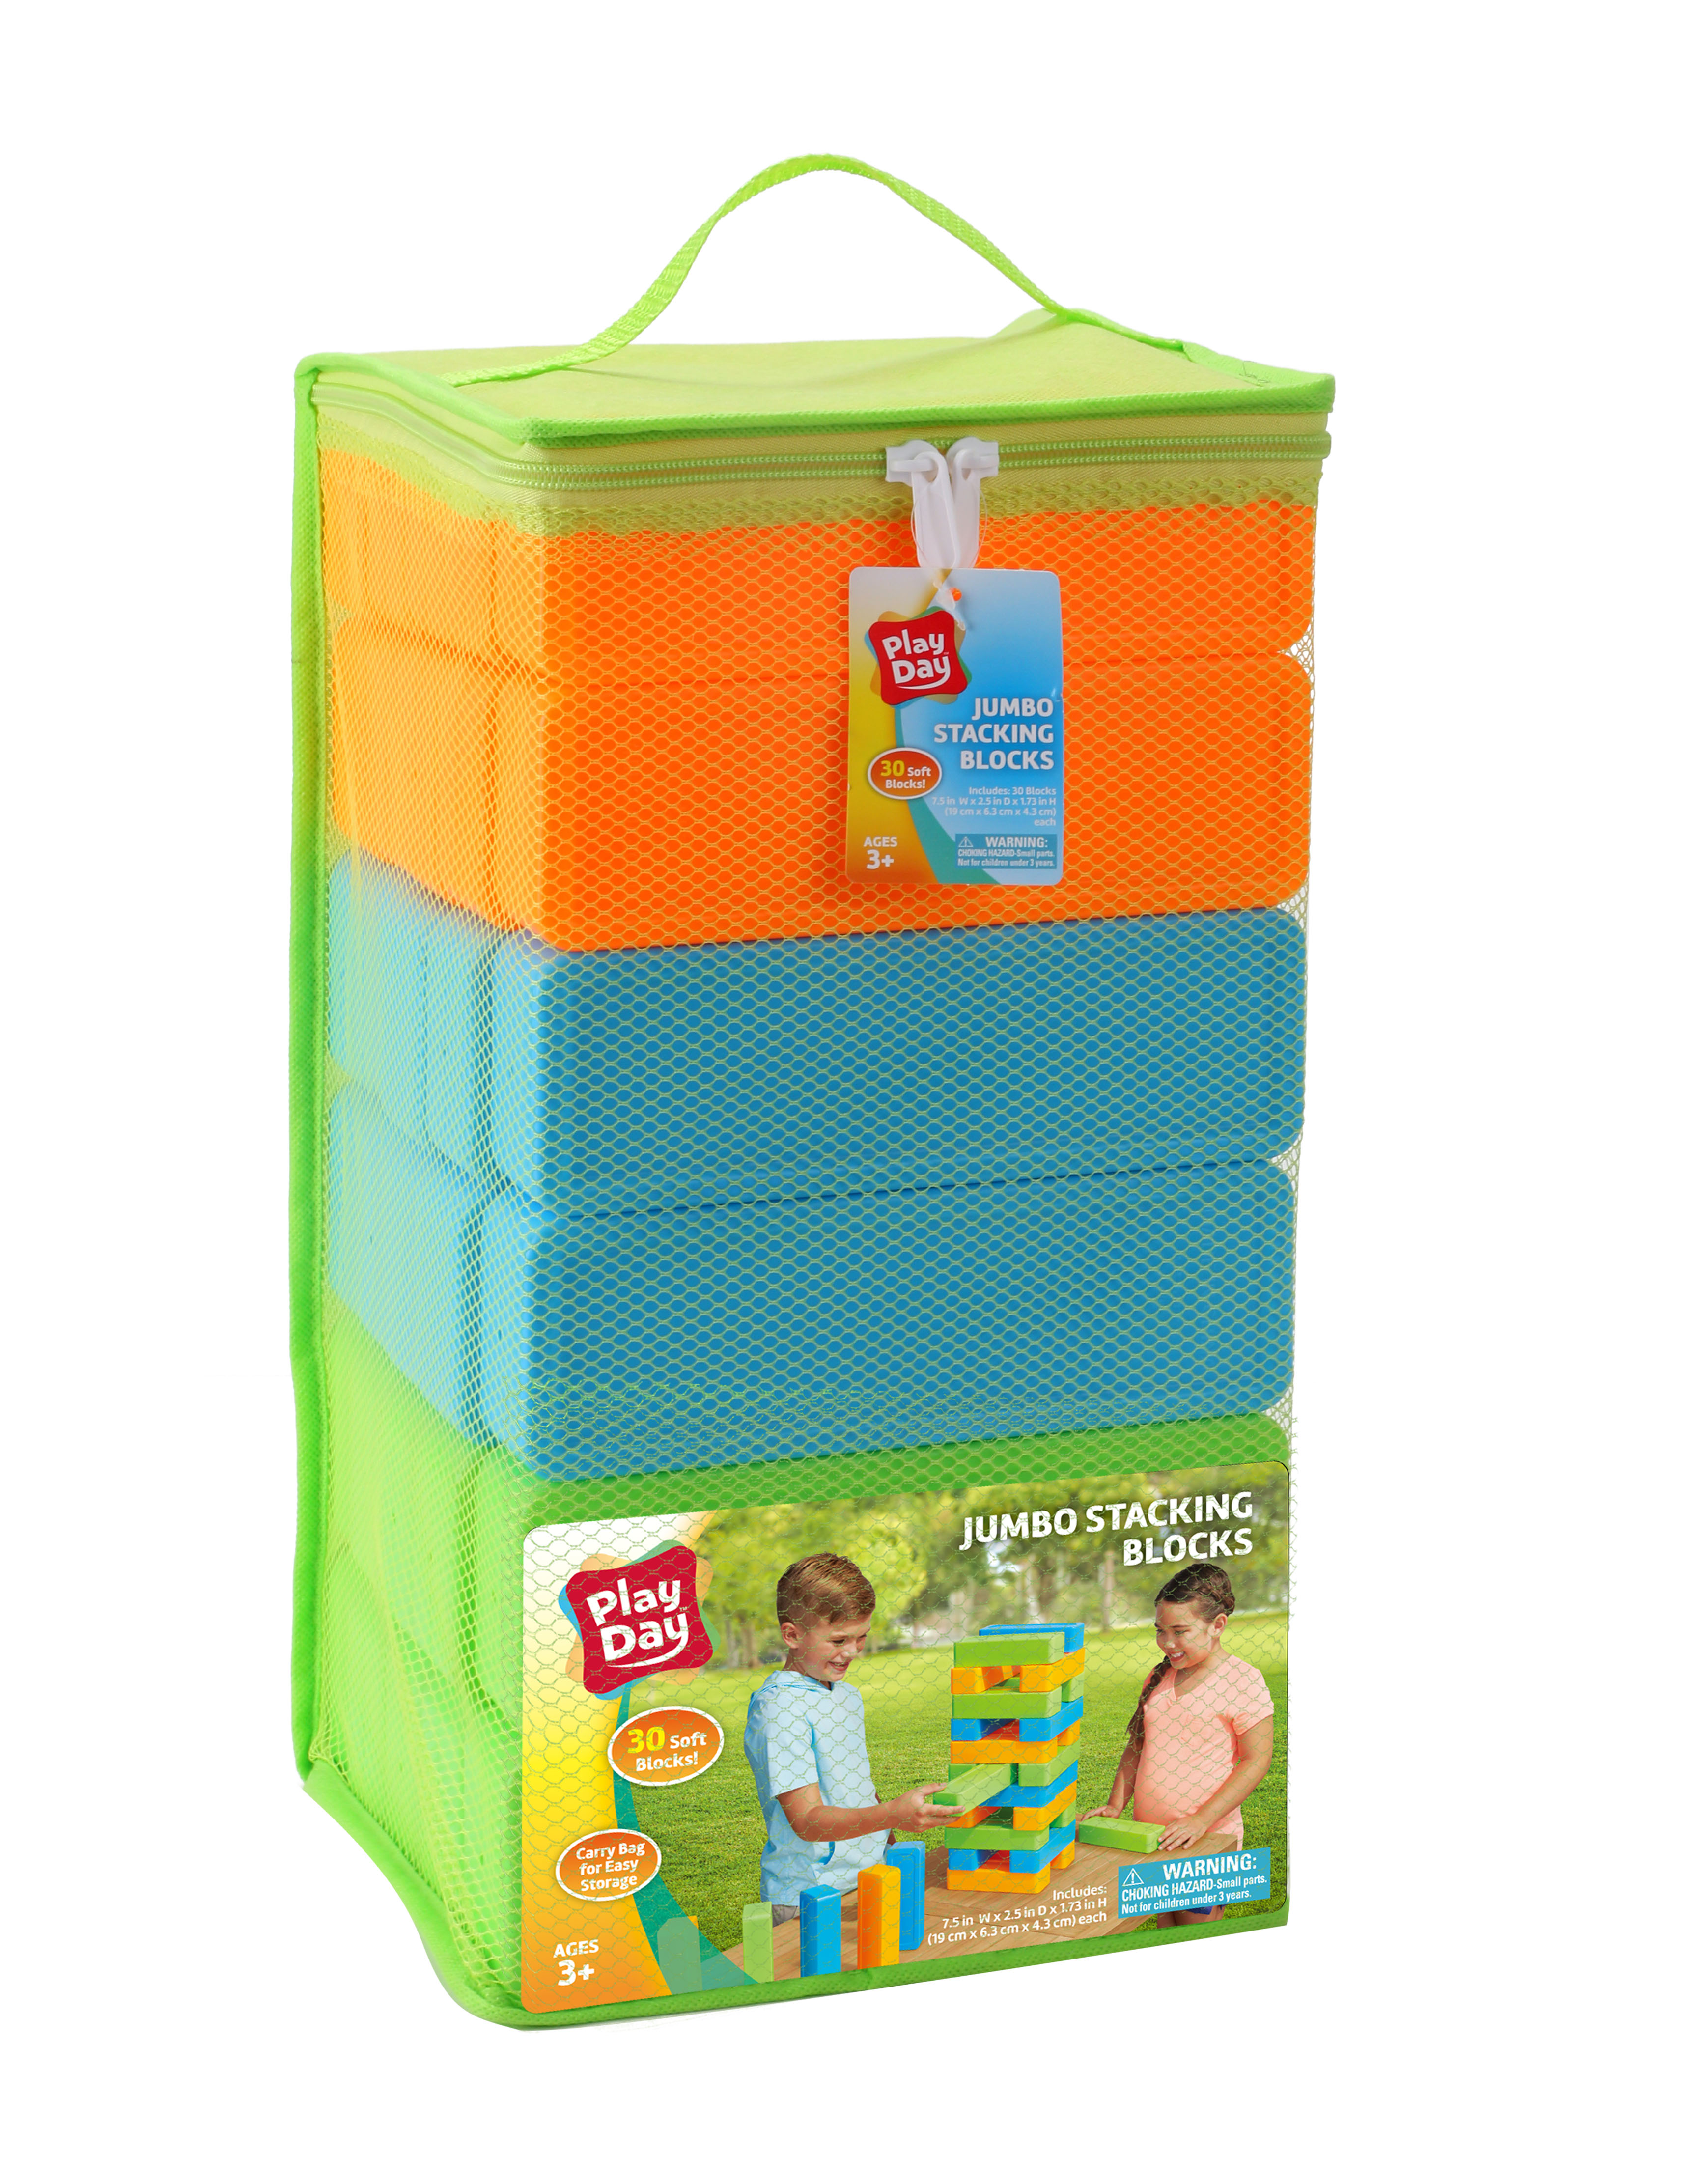 Play Day Jumbo Toy Stacking Block Set, 30 Outdoor Lawn Blocks, Children Ages 3+ - image 1 of 5